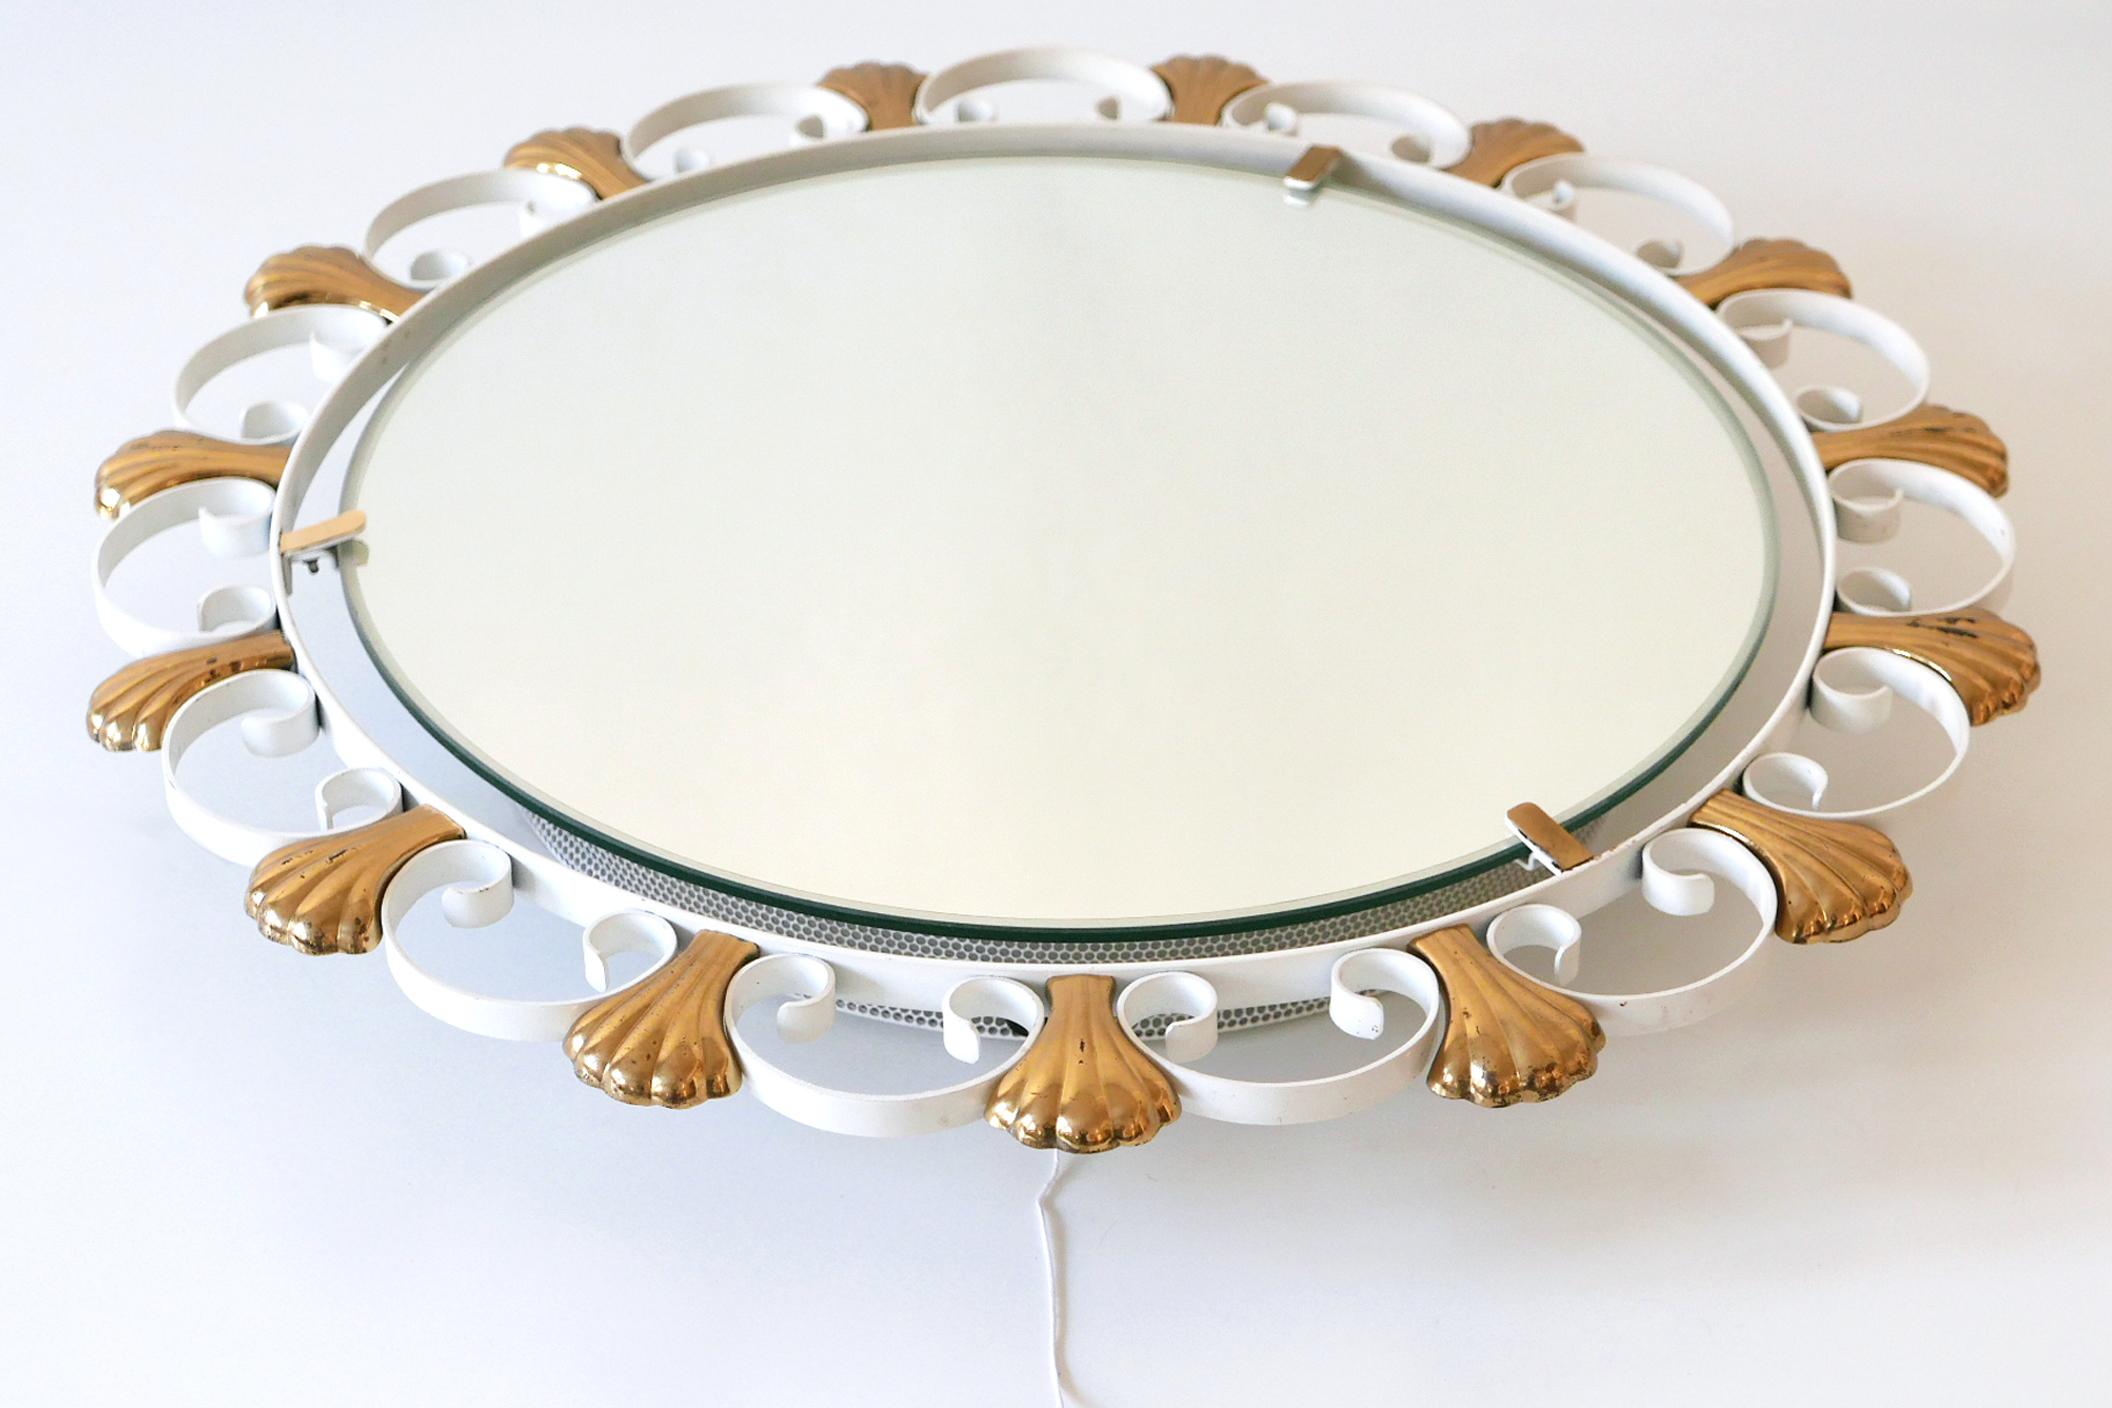 Elegant Mid-Century Modern Backlit Wall Mirror by Hillebrand, 1960s, Germany For Sale 10